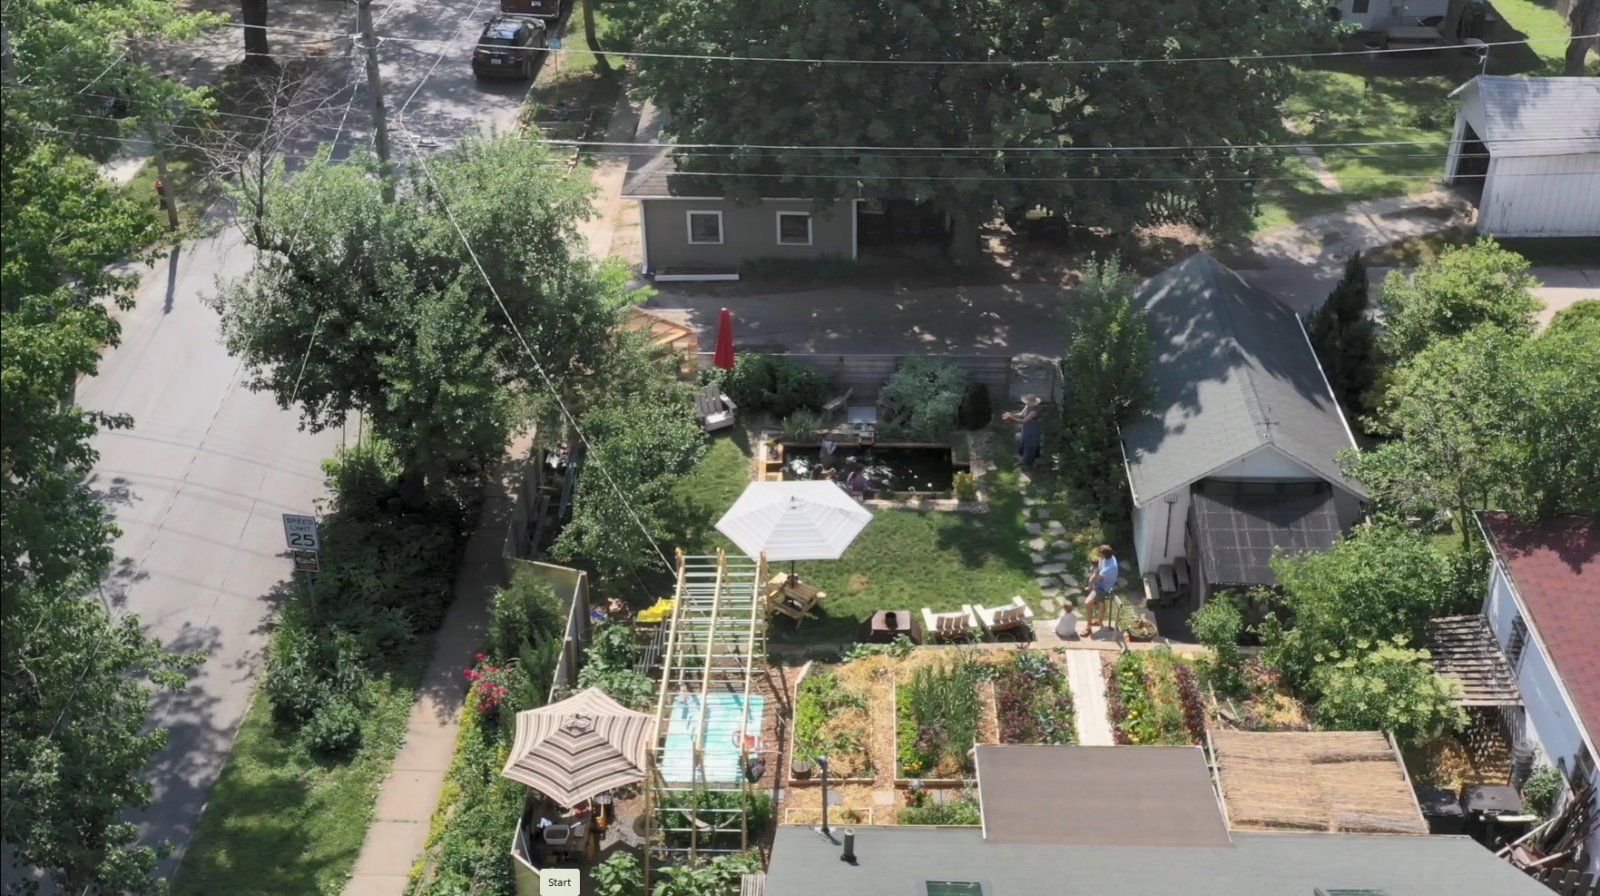 An aerial view of a backyard on a street corner, with garden beds, umbrellas, sheds, and a pond next to a house